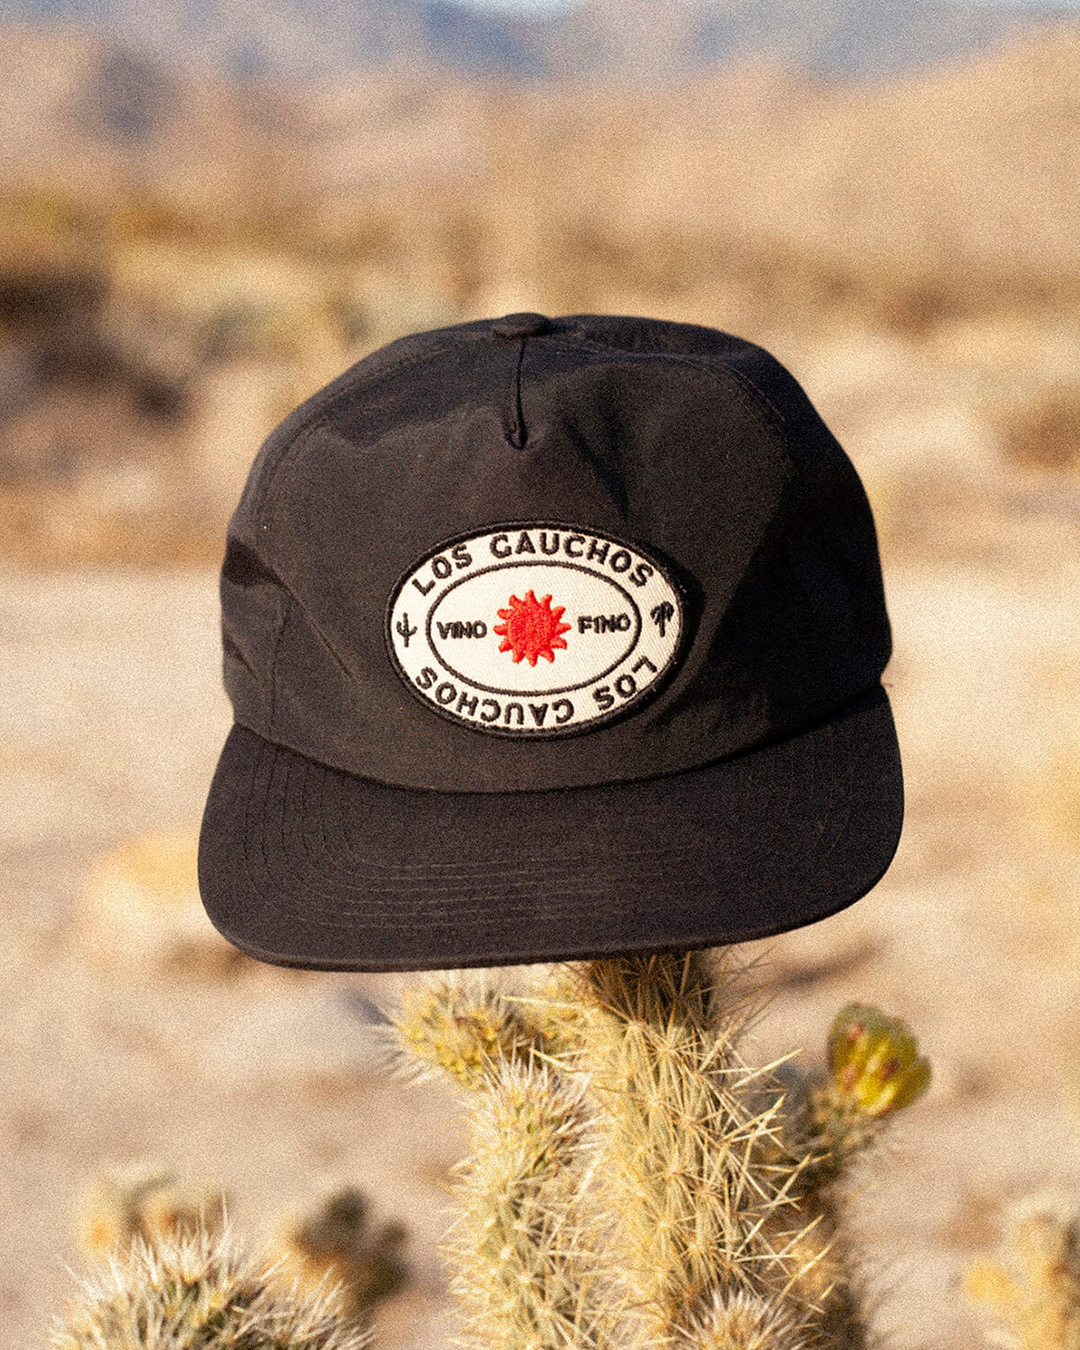 Featured product image displaying Los Gaucho's Snapback